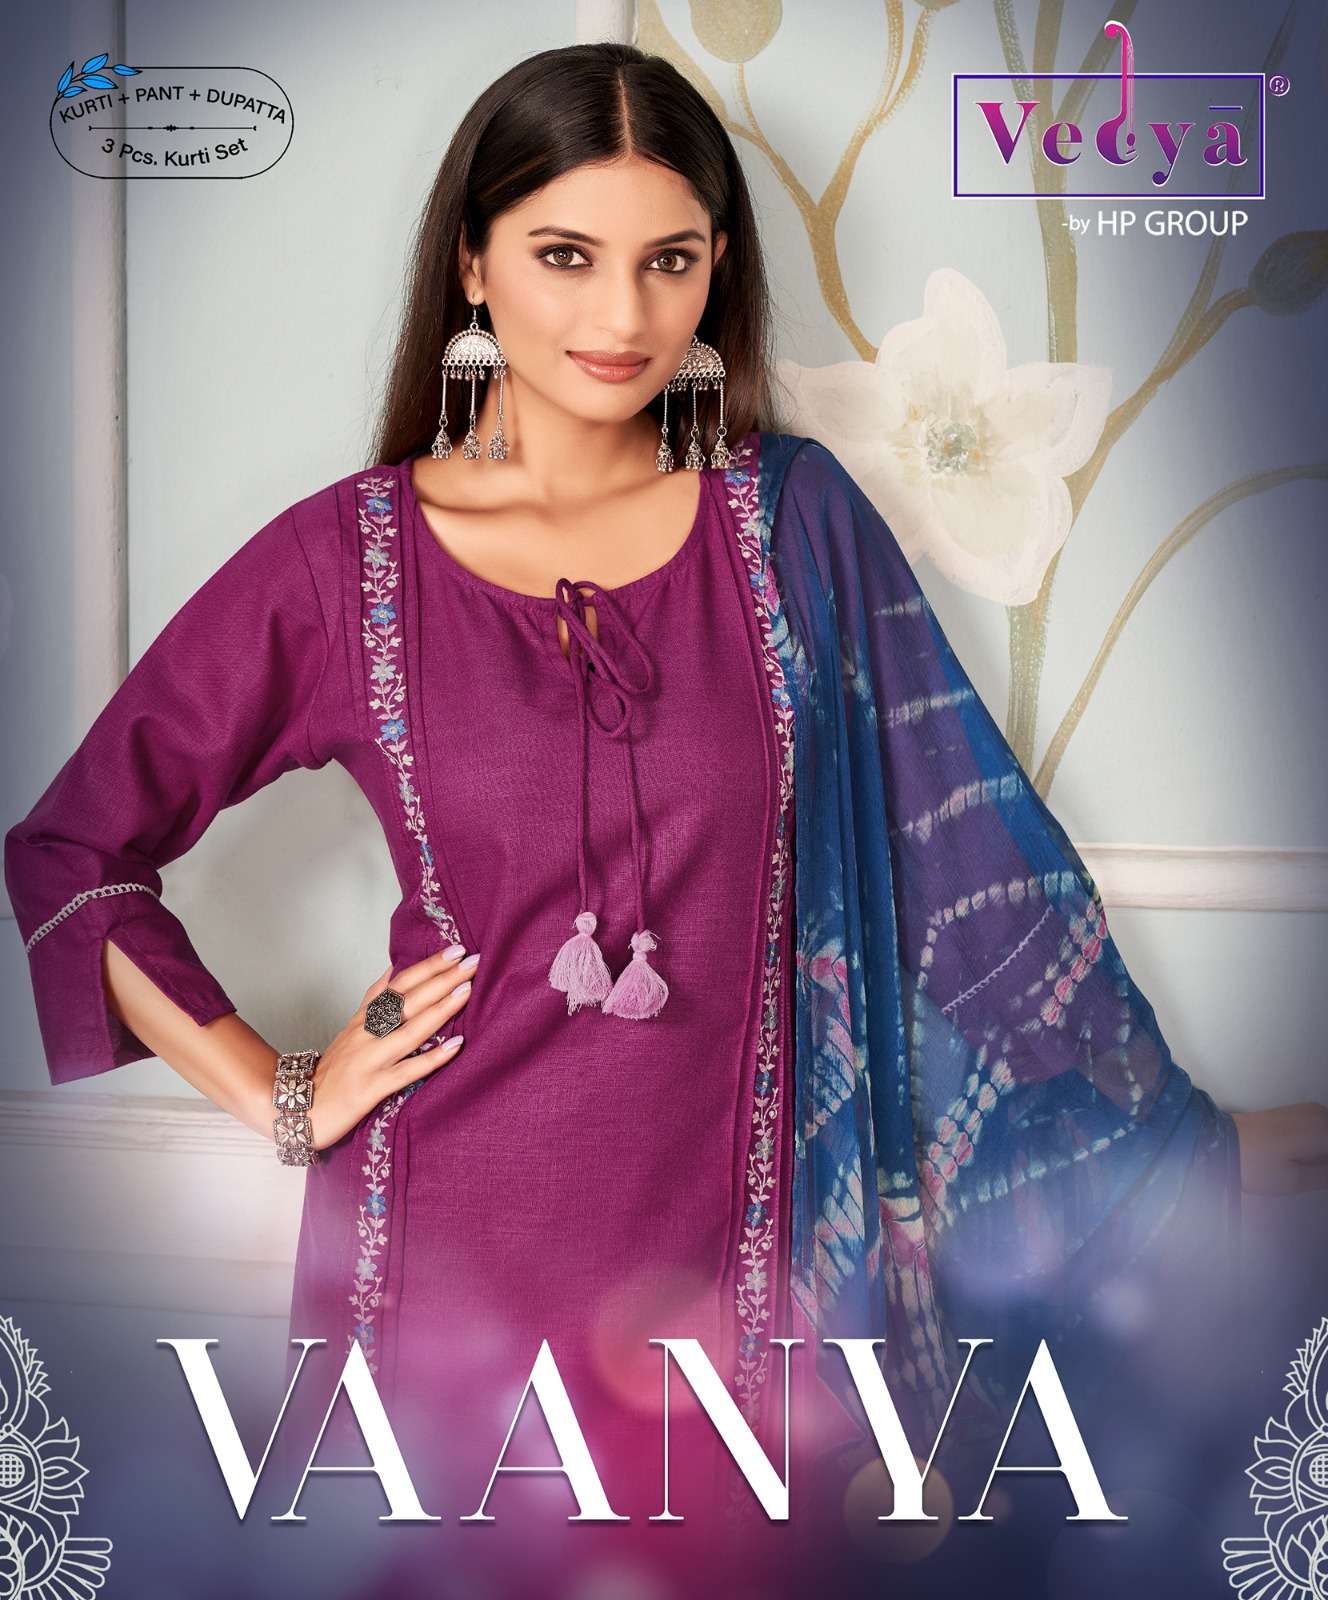 vaanya by vedya readymade fancy kurti with pant and dupatta